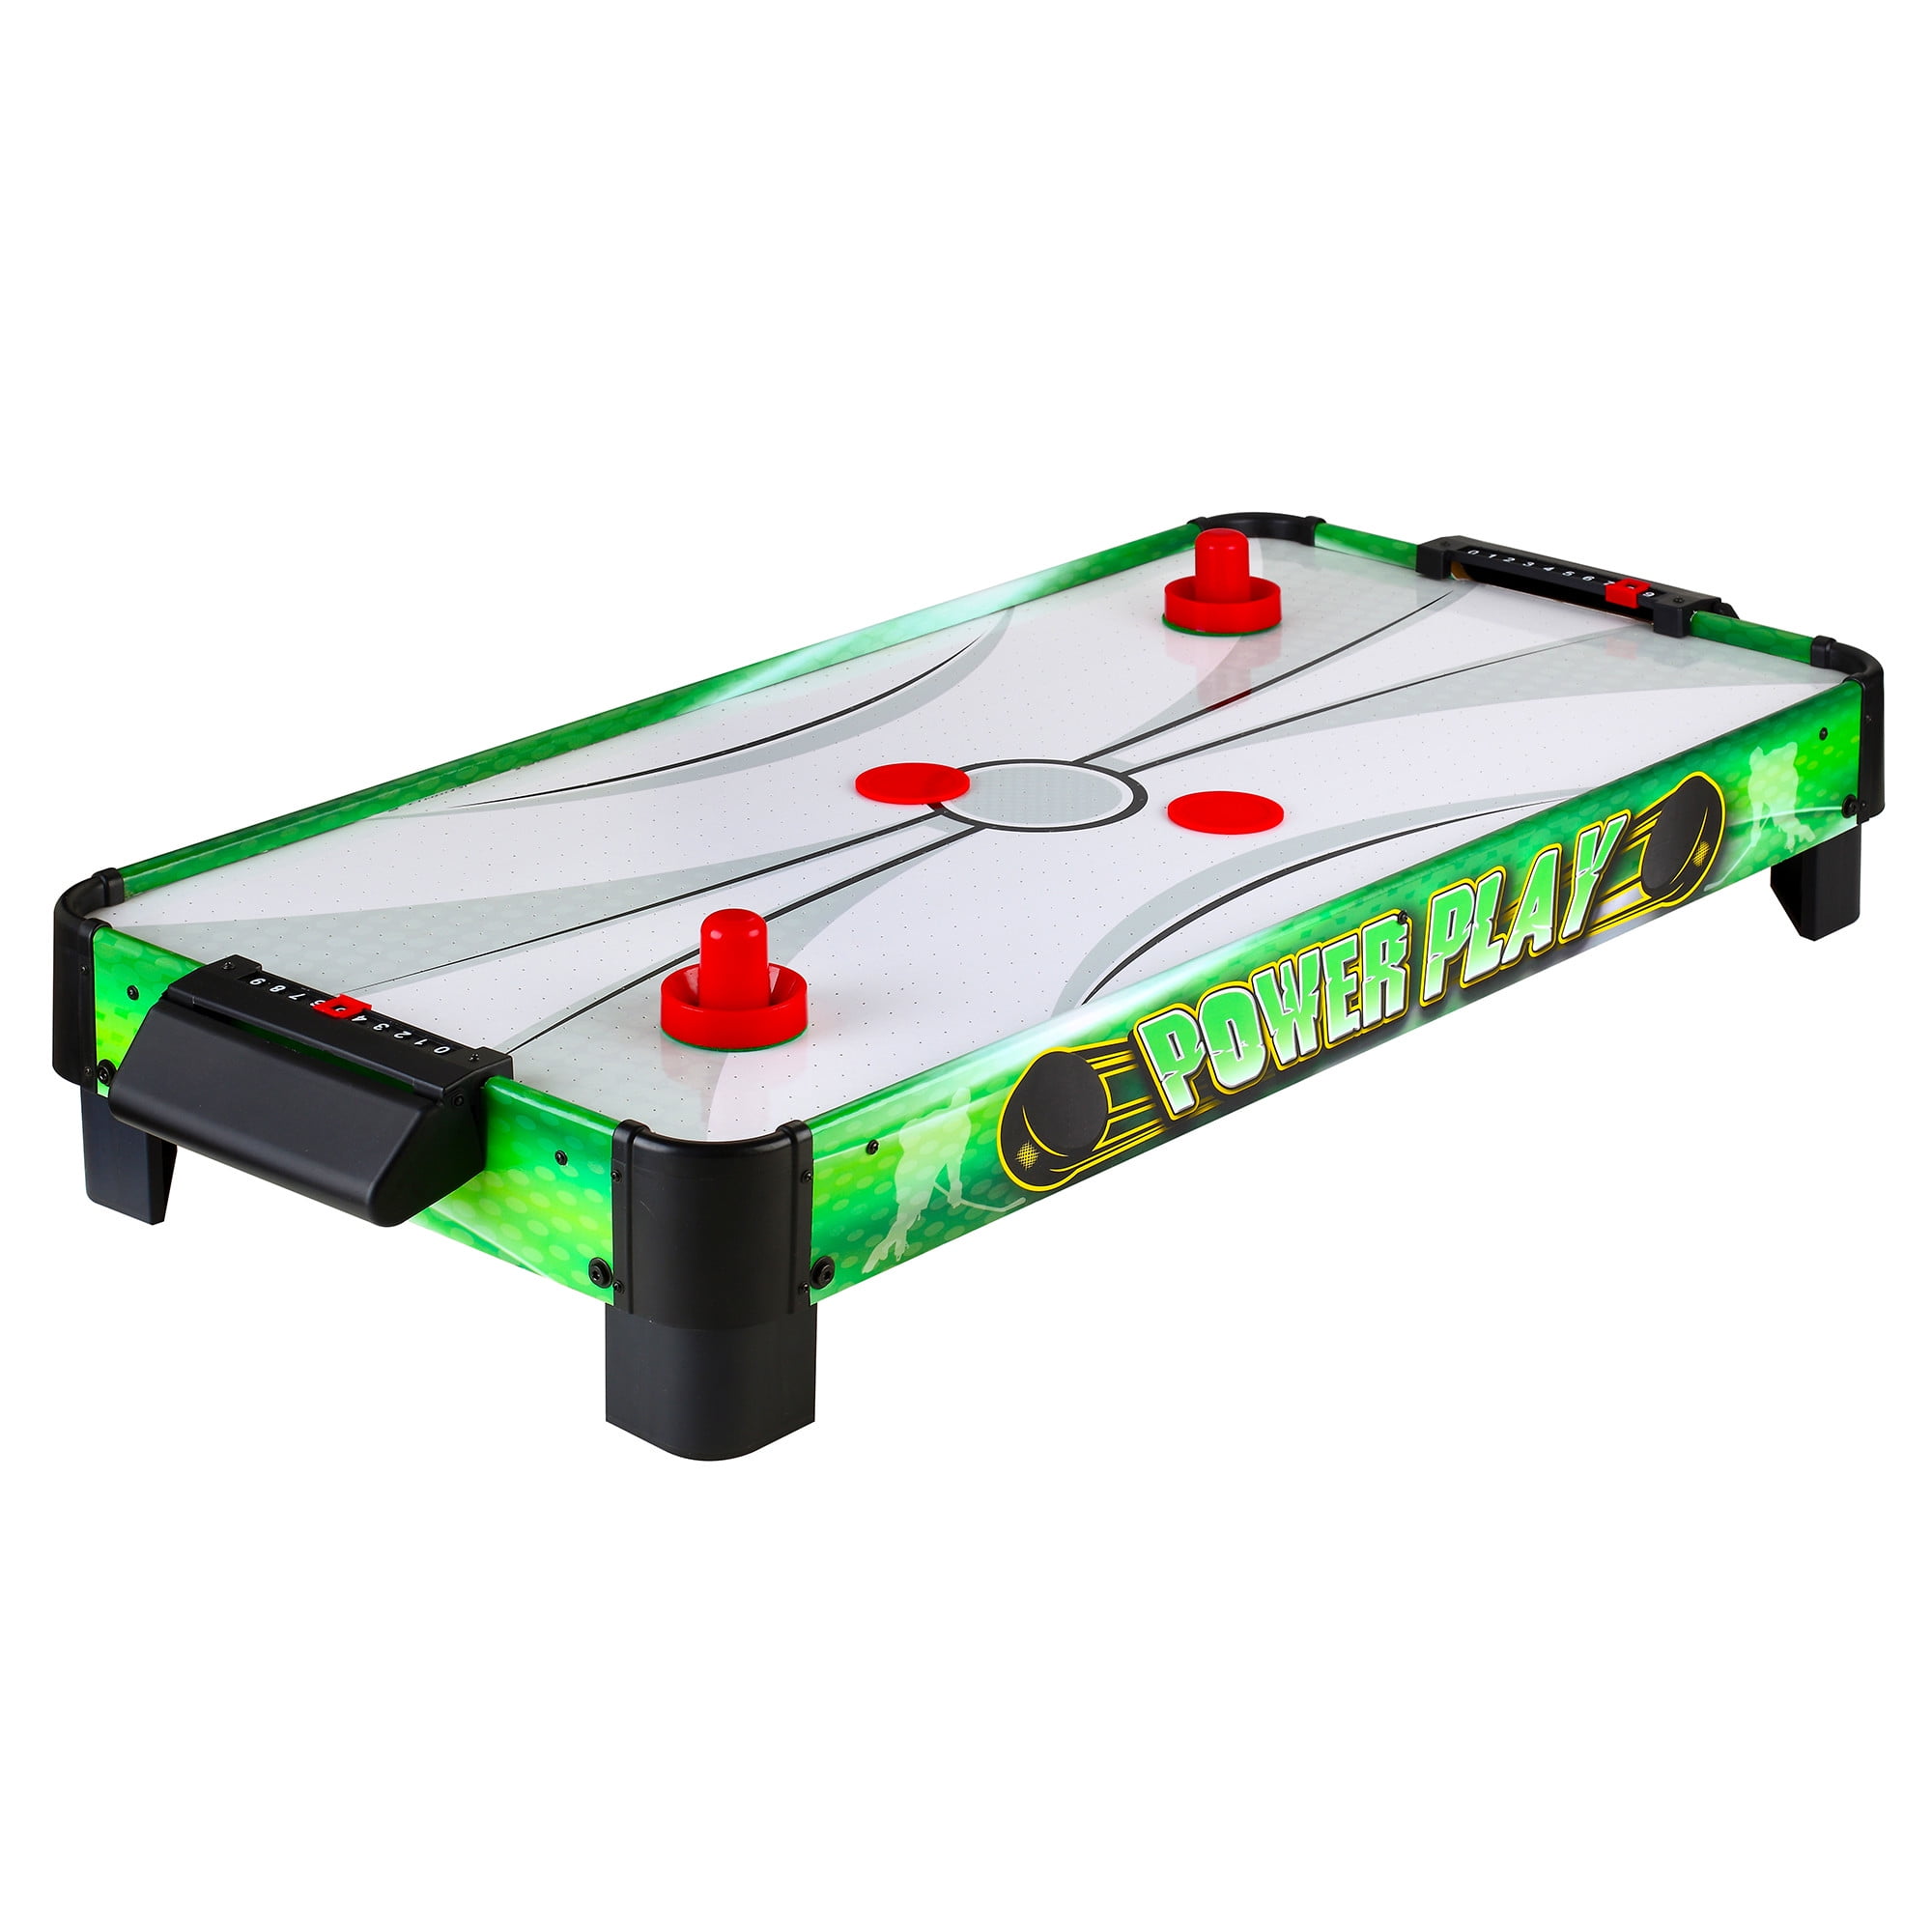 NEW WNB 20" TABLE TOP AIR HOCKEY ELECTRONIC GAME Family toys and games 50cm 